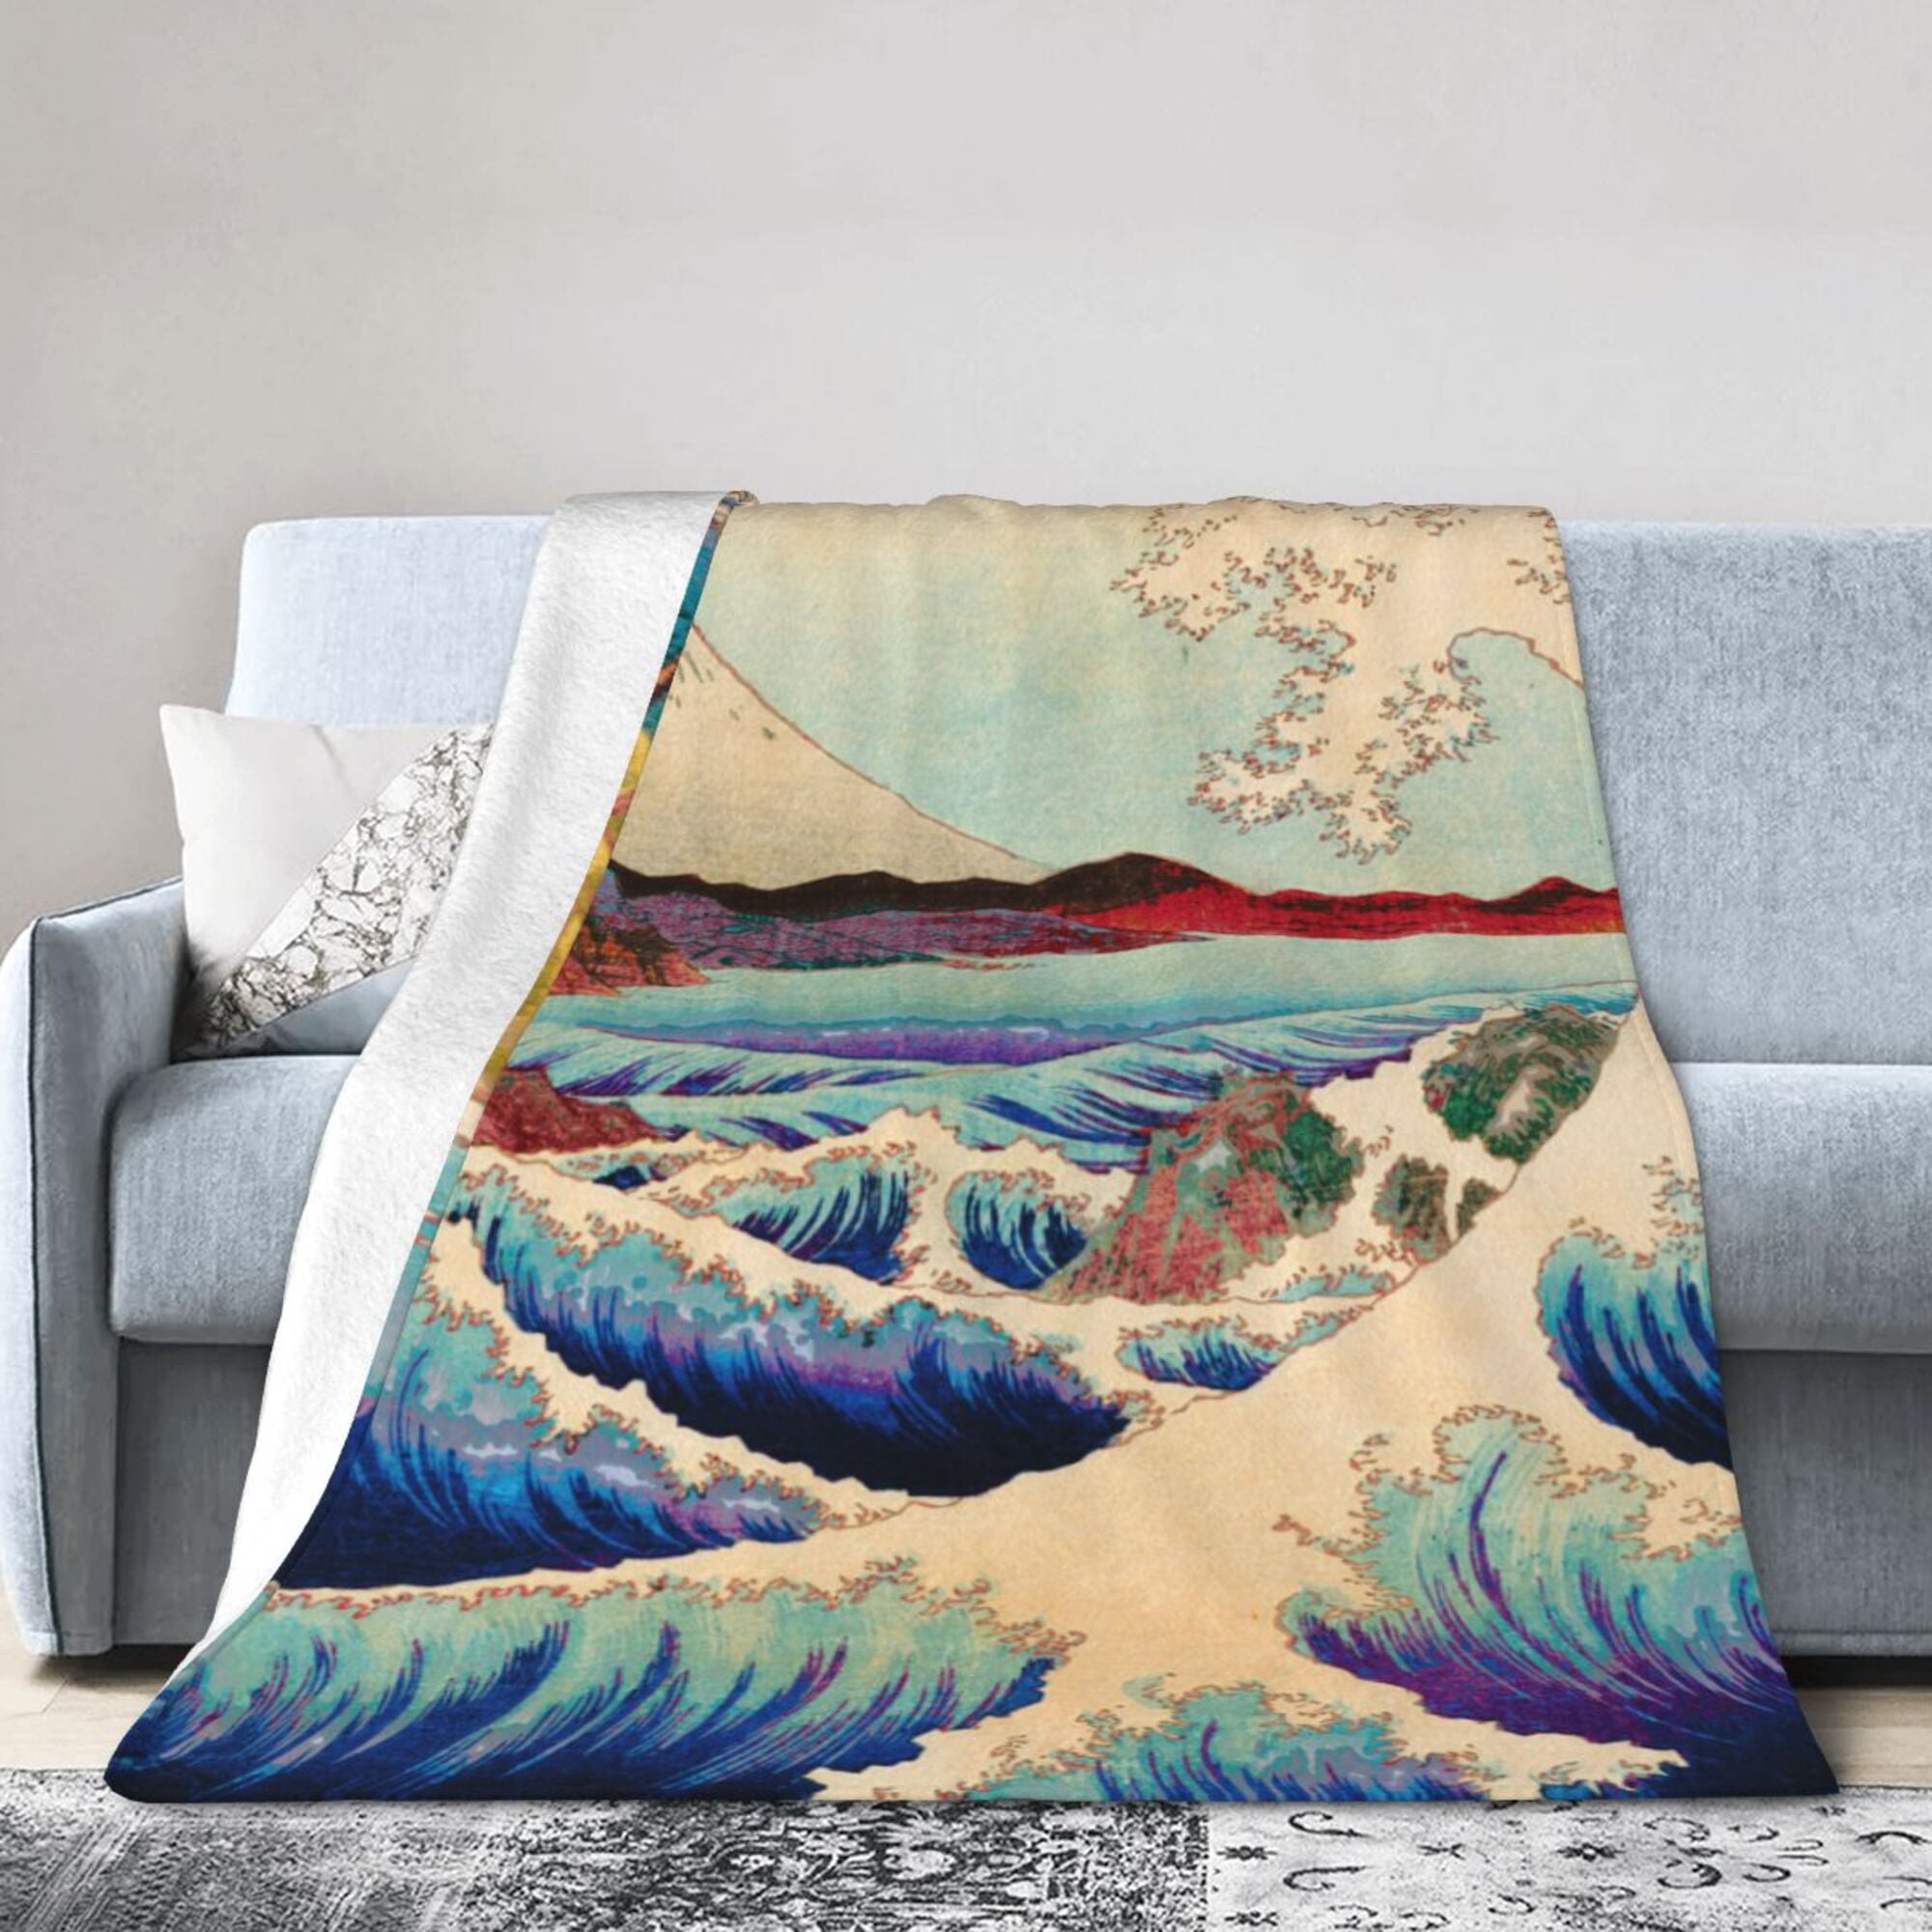 trimmen kraai alarm Throw Blanket Japanese Mount Fuji Wave For Couch-Ultra-Soft Micro Fleece  Sofa Bed Camping Travel Blanket For Kid Baby Boys Girls Adults 80"X60" -  Walmart.com